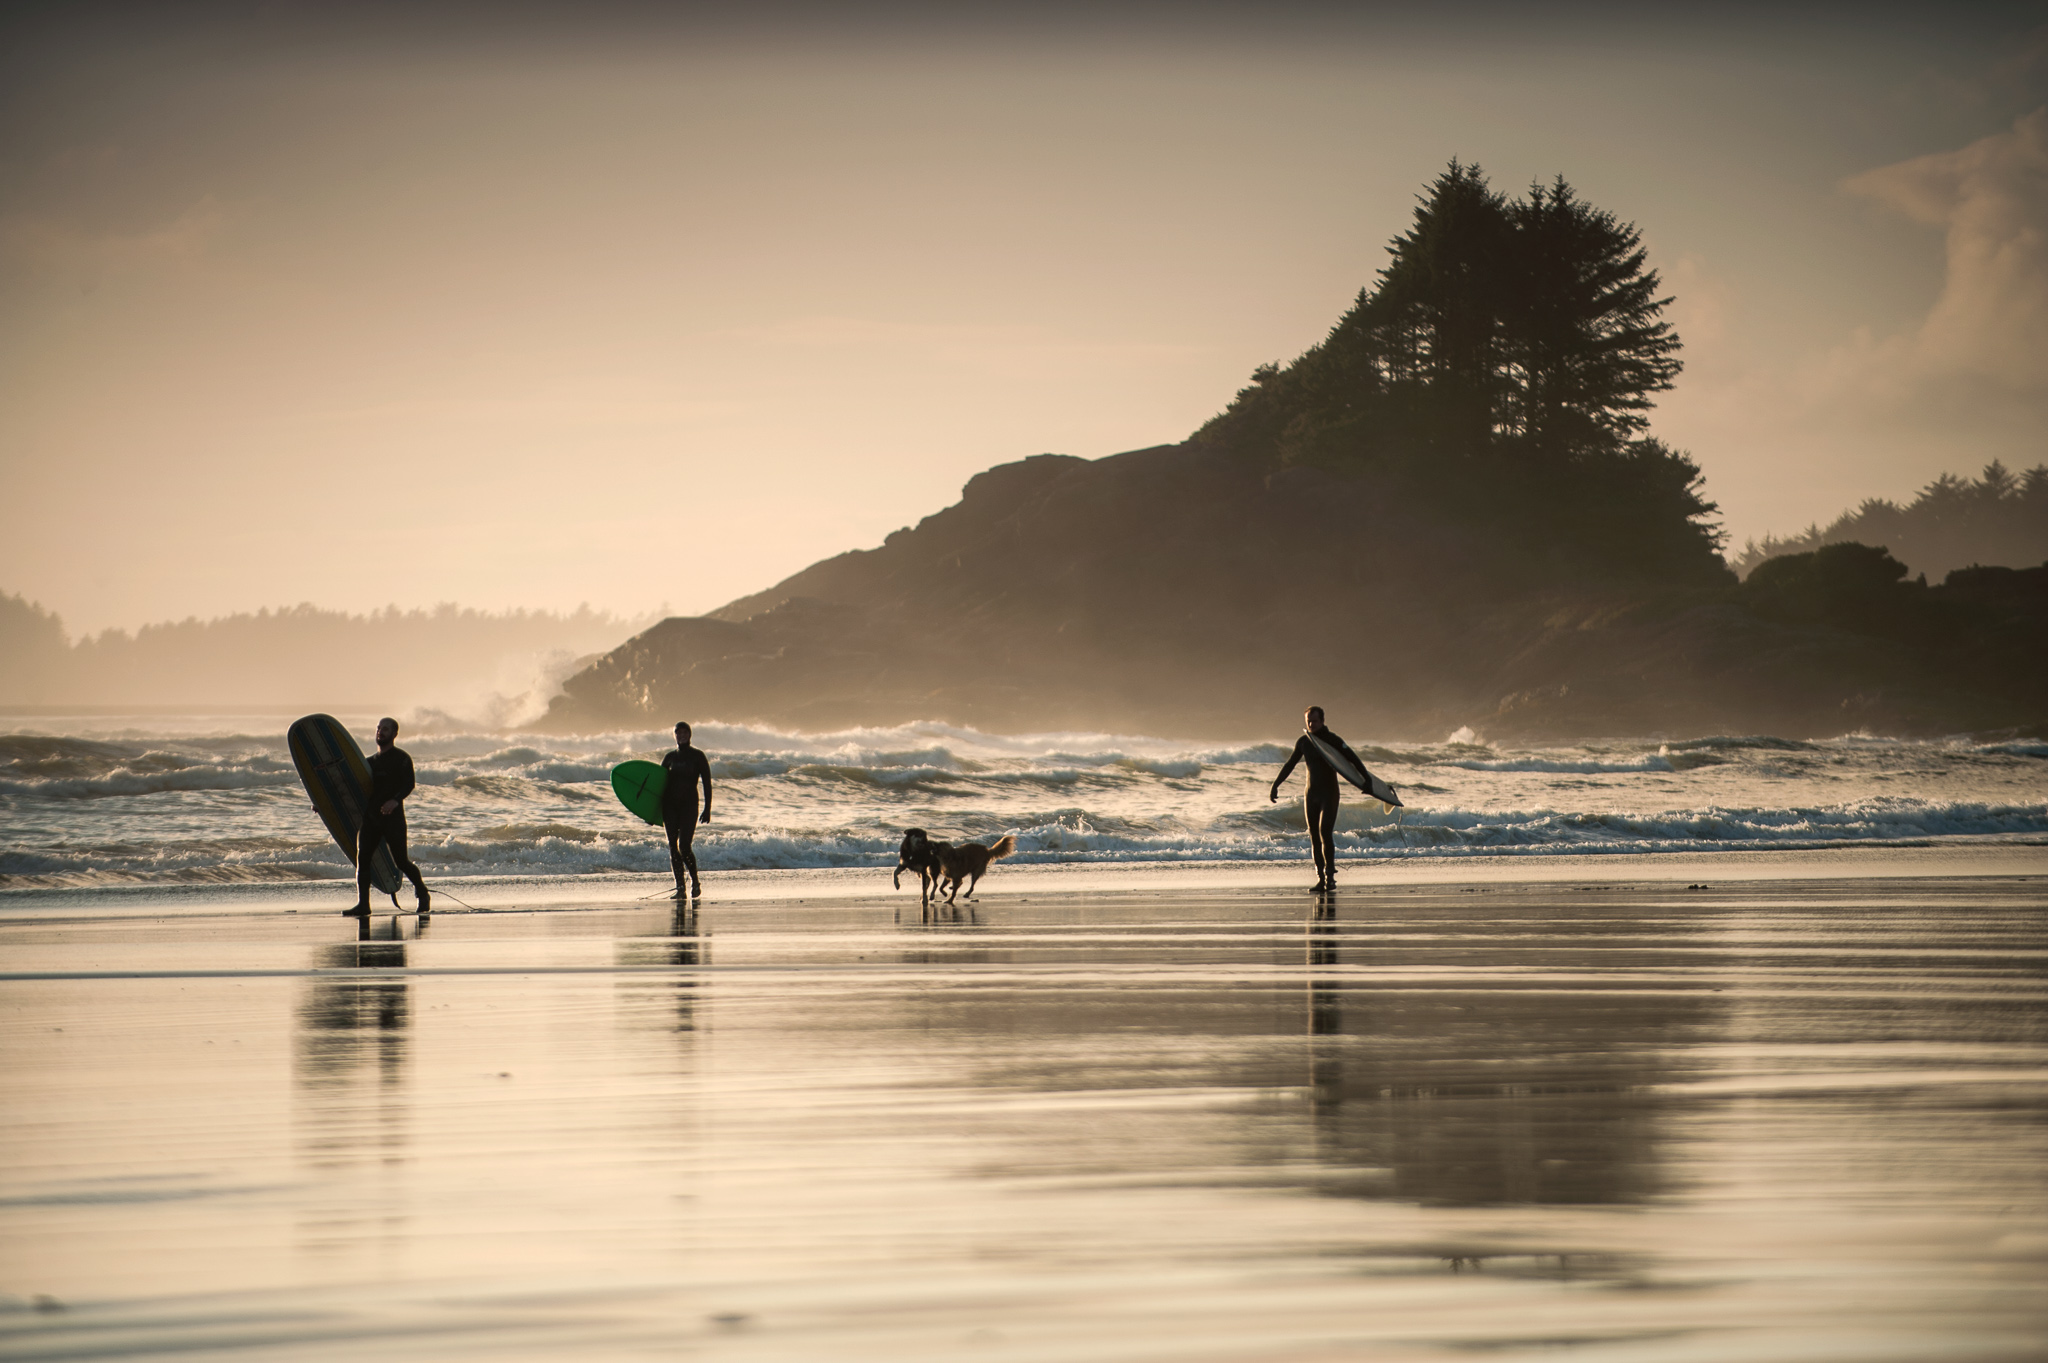 Epic BC road trip - Top things to do Tofino Long Beach - Surfing at Cox Bay Destination Canada, Brian Caissie